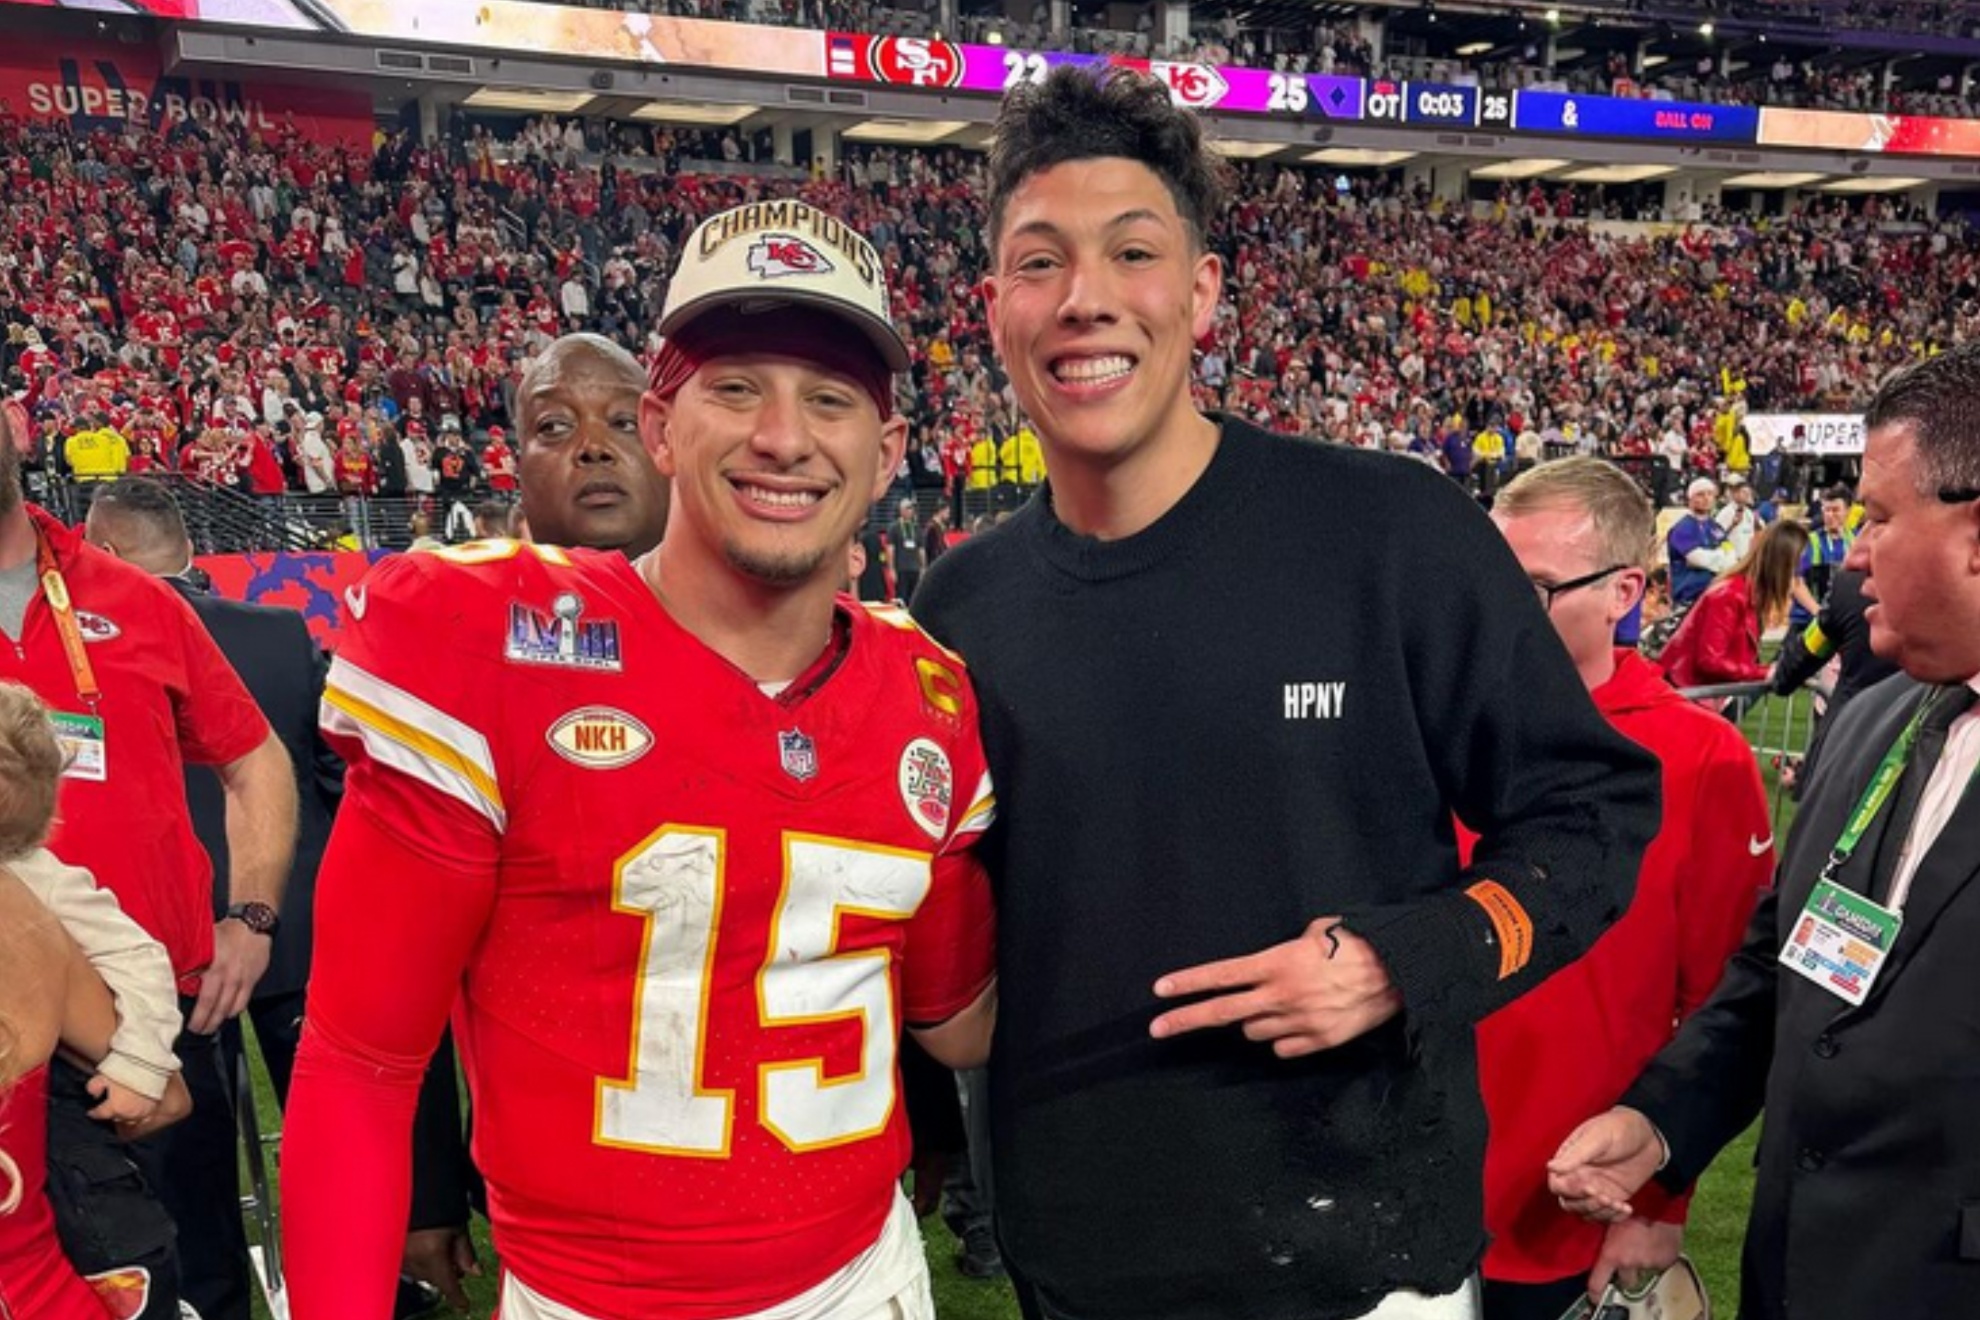 Jackson (L) and Patrick Mahomes after the Super Bowl LVIII game.